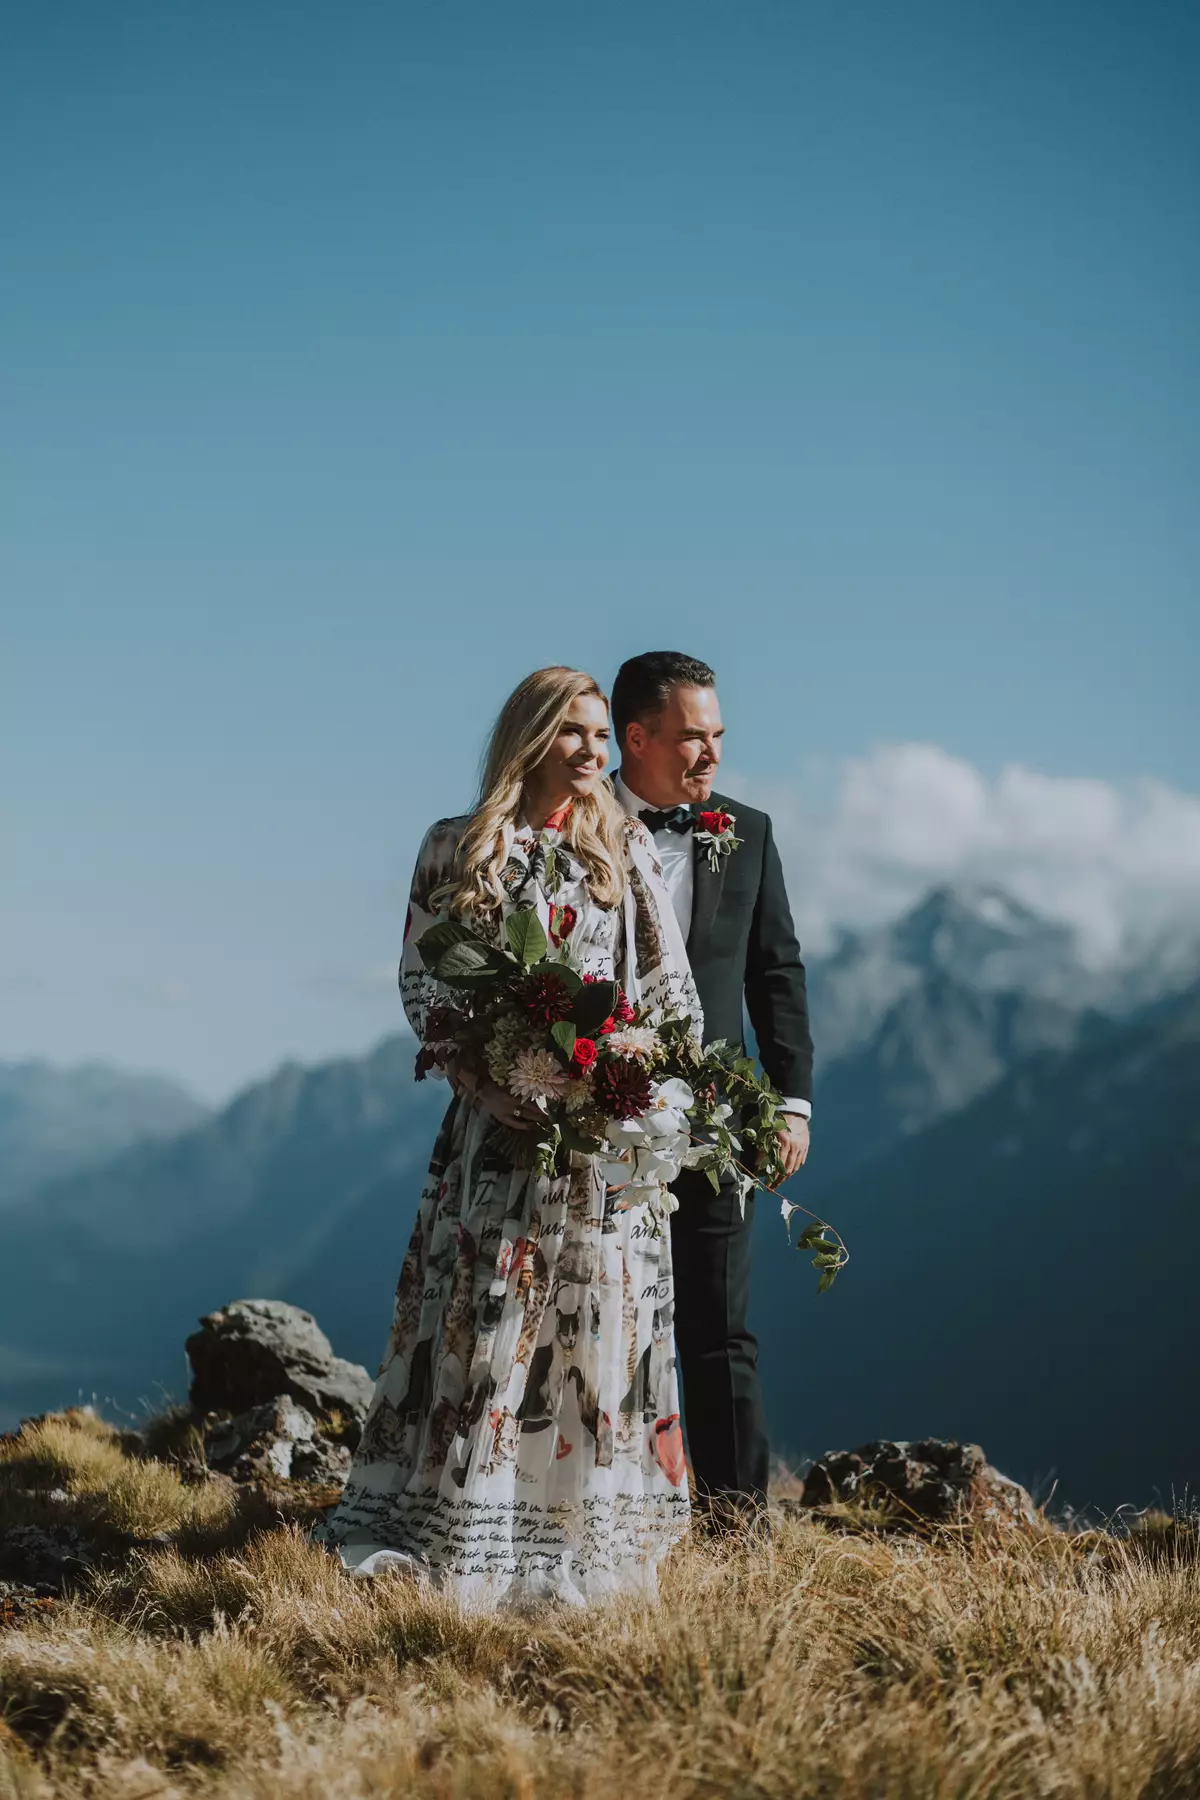 Amy and Sean were married on Valentine's Day 2018 (